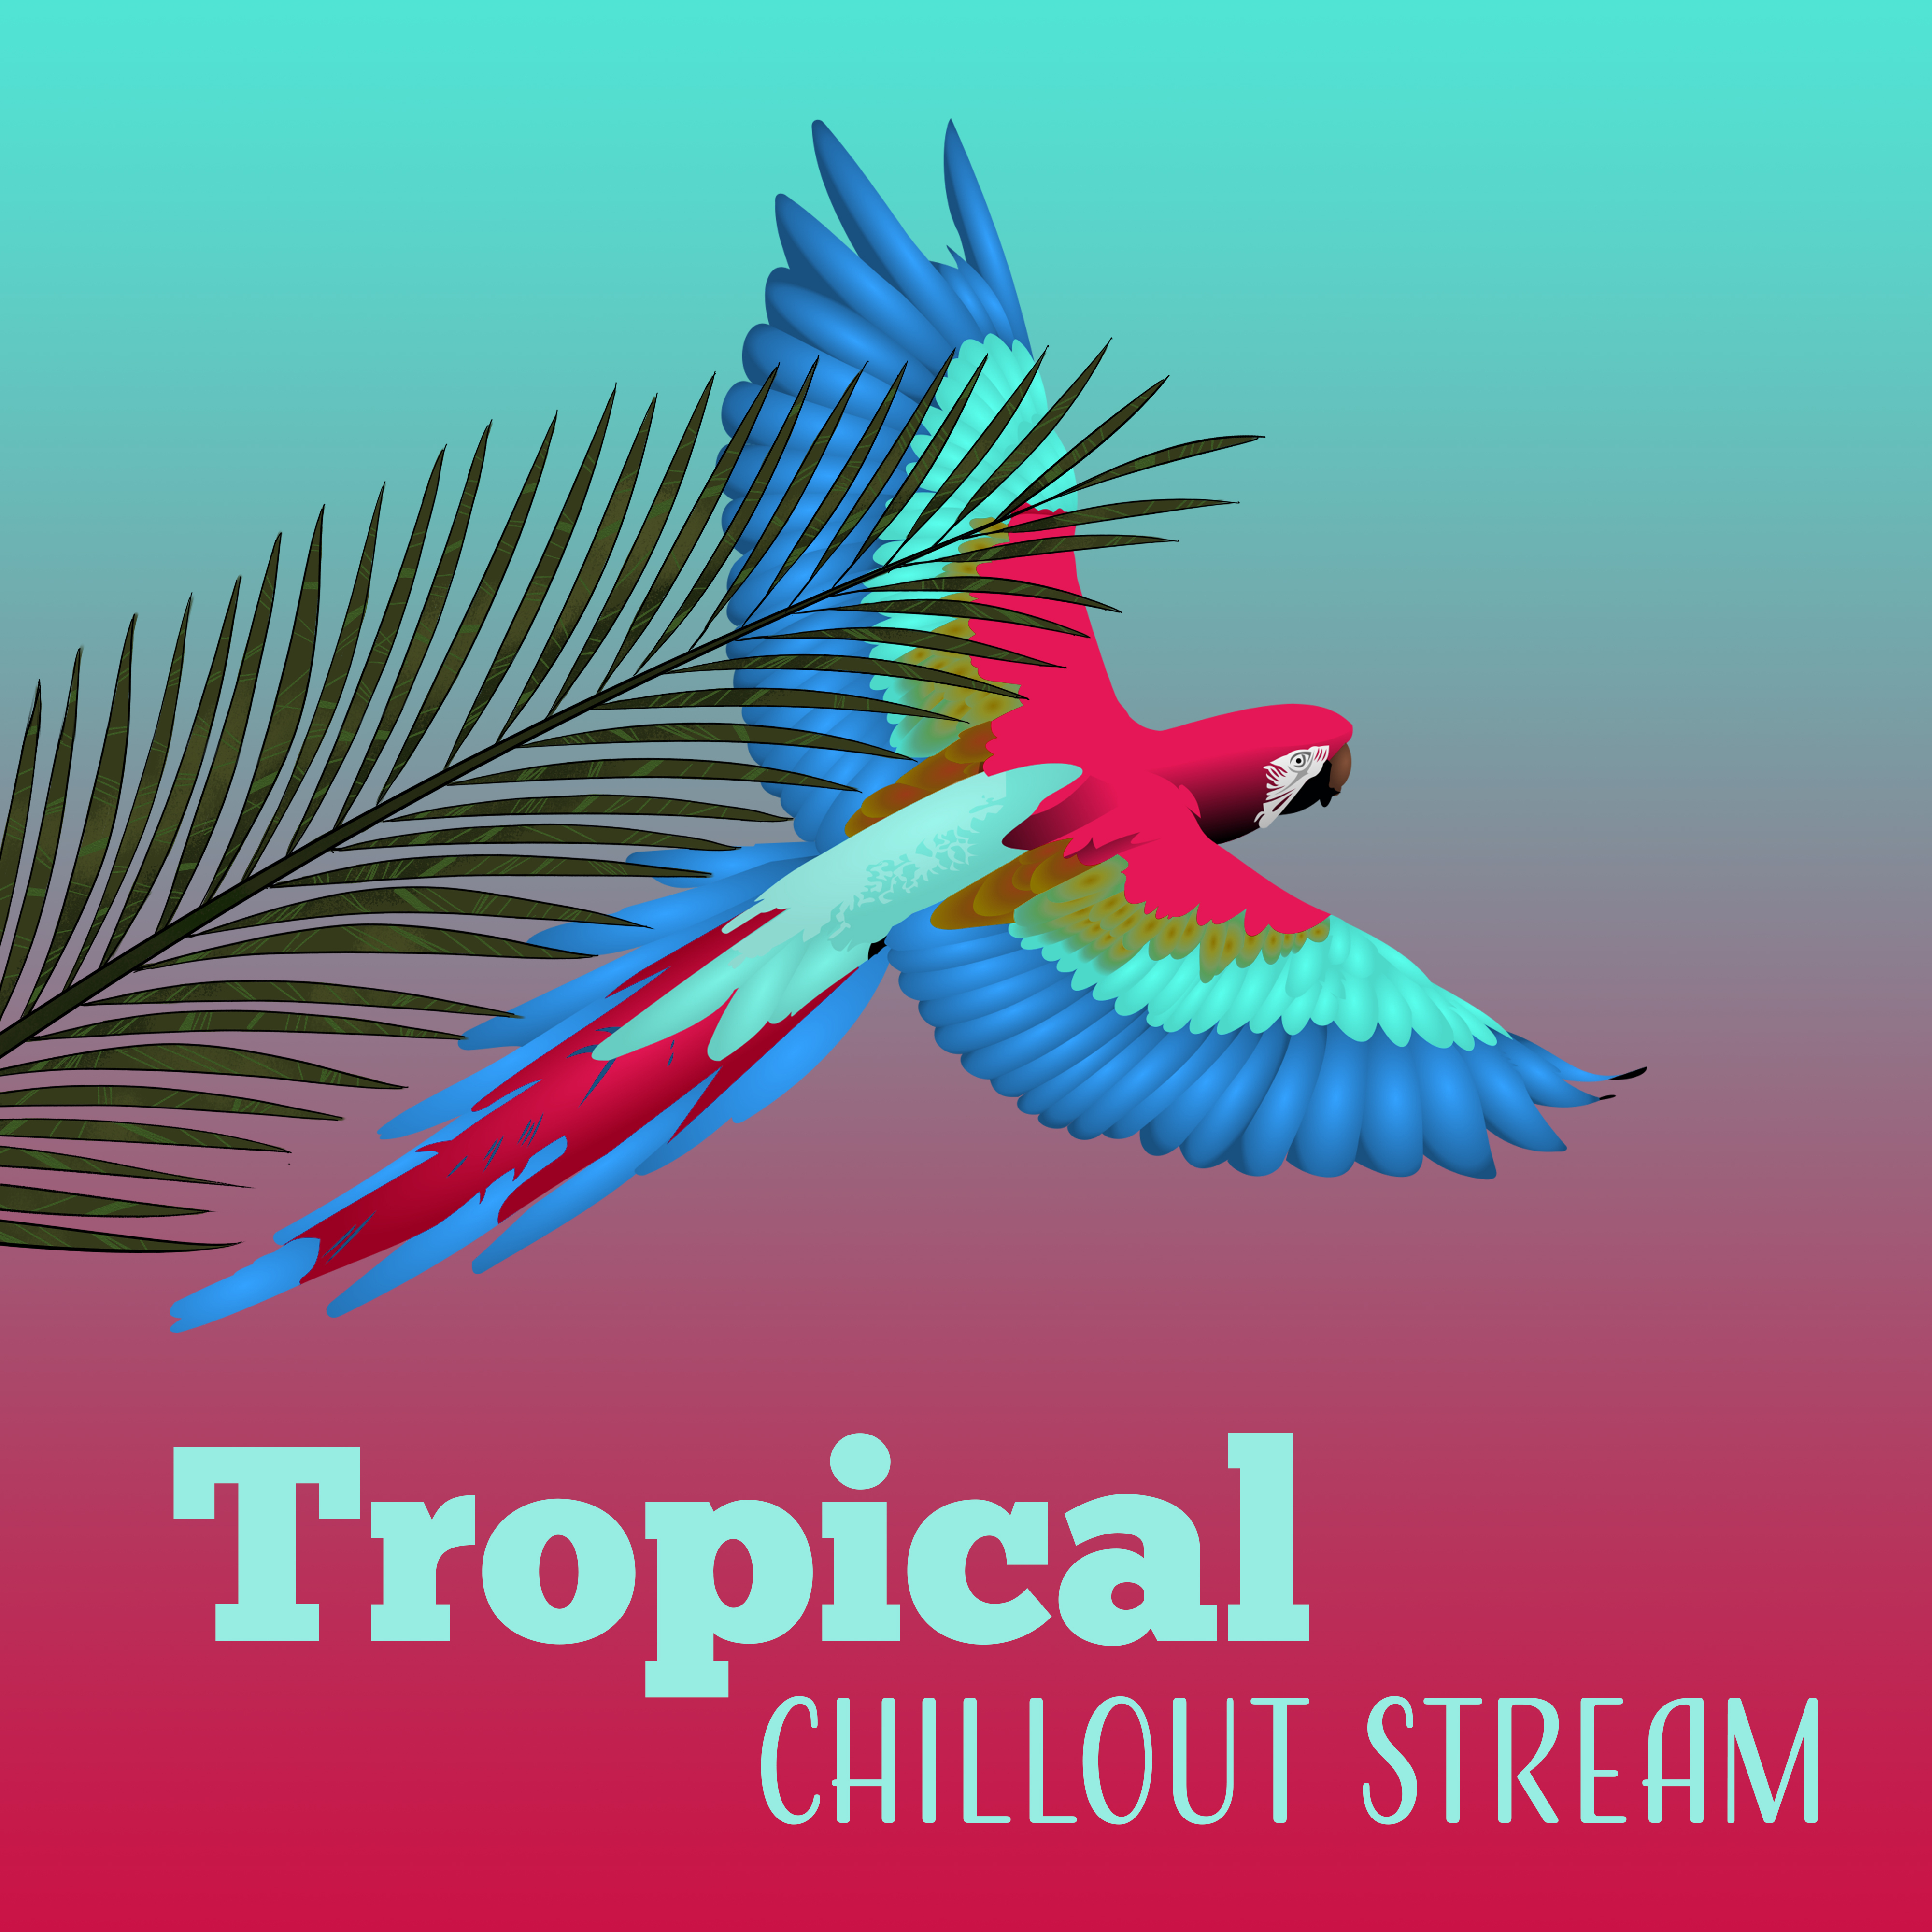 Tropical Chillout Stream - Hot Chill Out Vibes, Beach Music, Bora Bora, Relax, Summer, Holiday